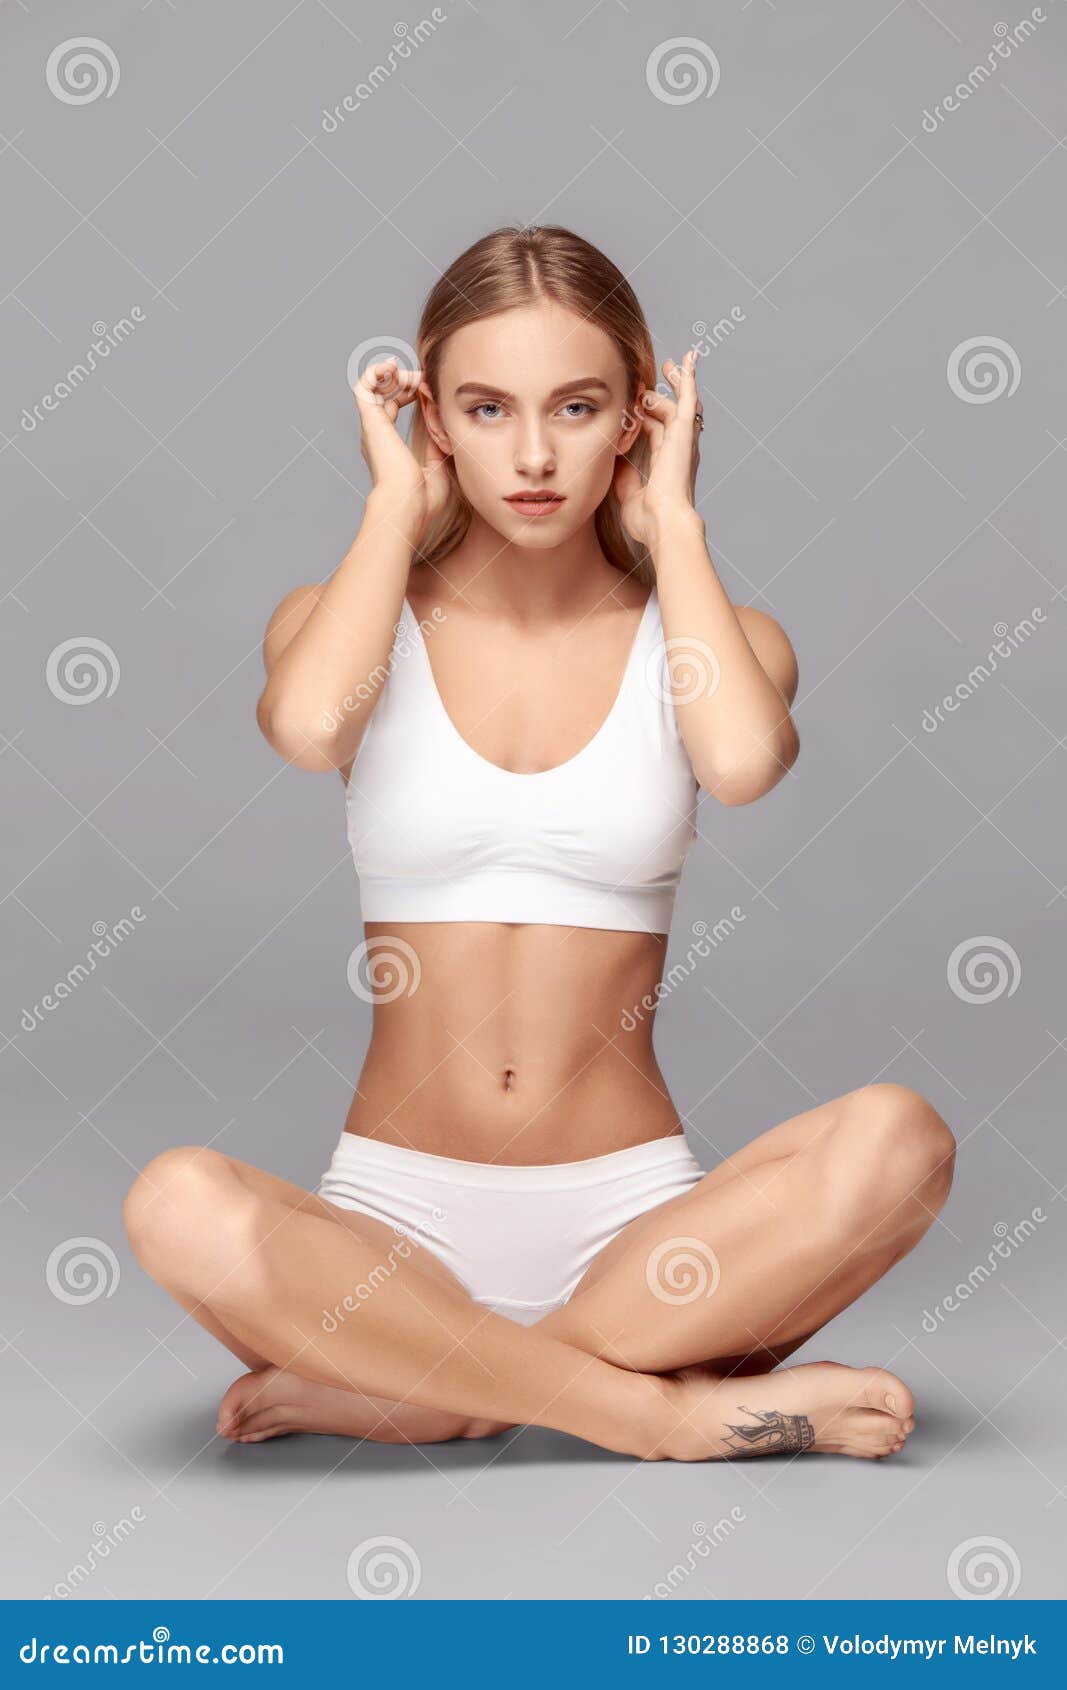 Perfect Slim Toned Young Body of the Girl . Stock Photo - Image of  caucasian, lifestyle: 130288868